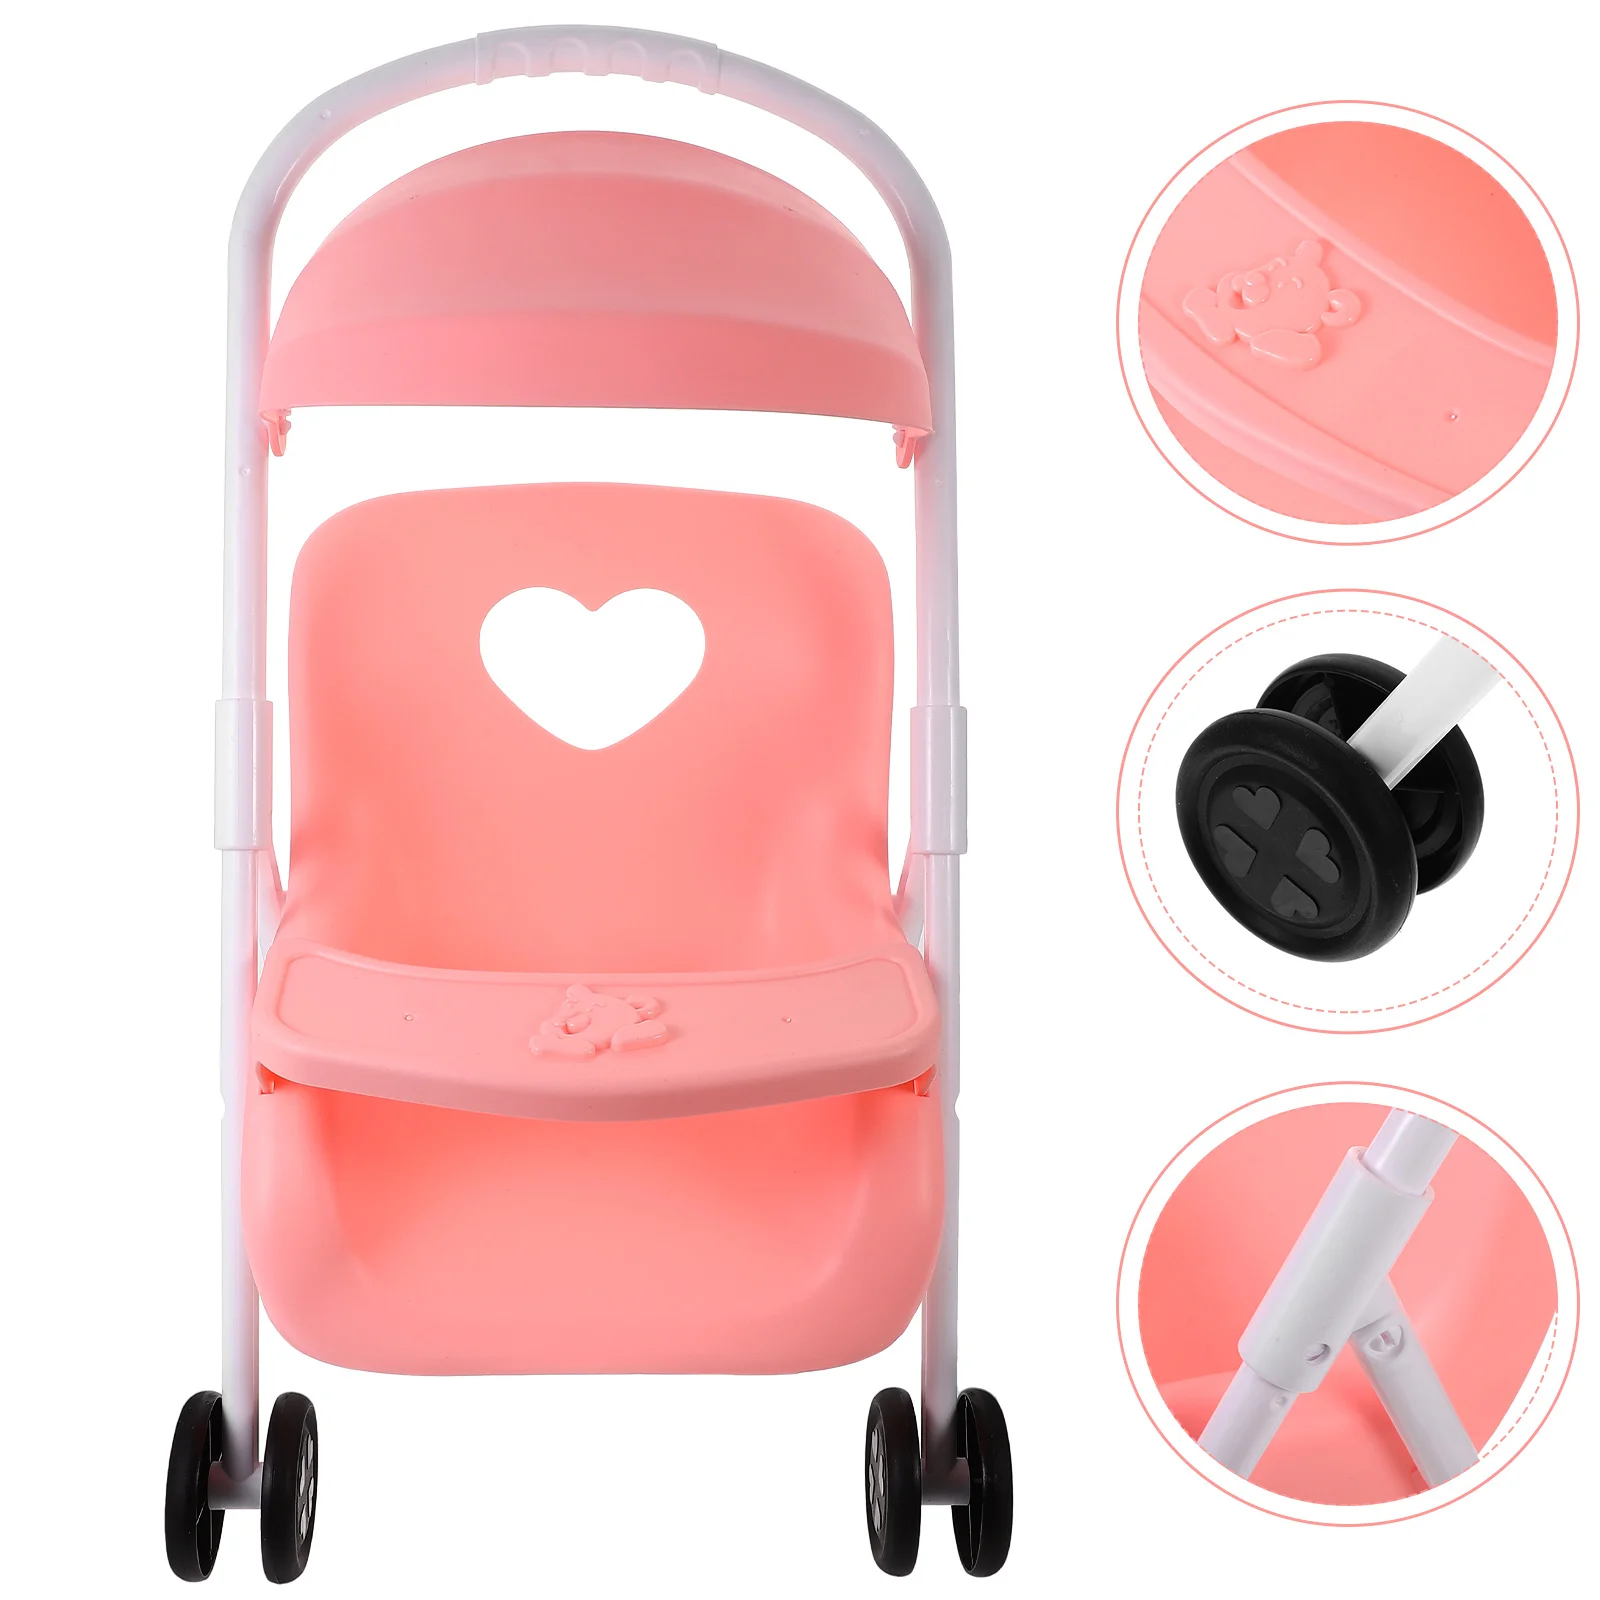 Doll Stroller Play Game Doll Stroller Simulated Play Game Stroller Furniture Adornment Children Role Playing Game for Dollhouse baby stroller umbrella baby car umbrellas hand open 8mm metal shaft and fiberglass ribs clamp parasol clip children